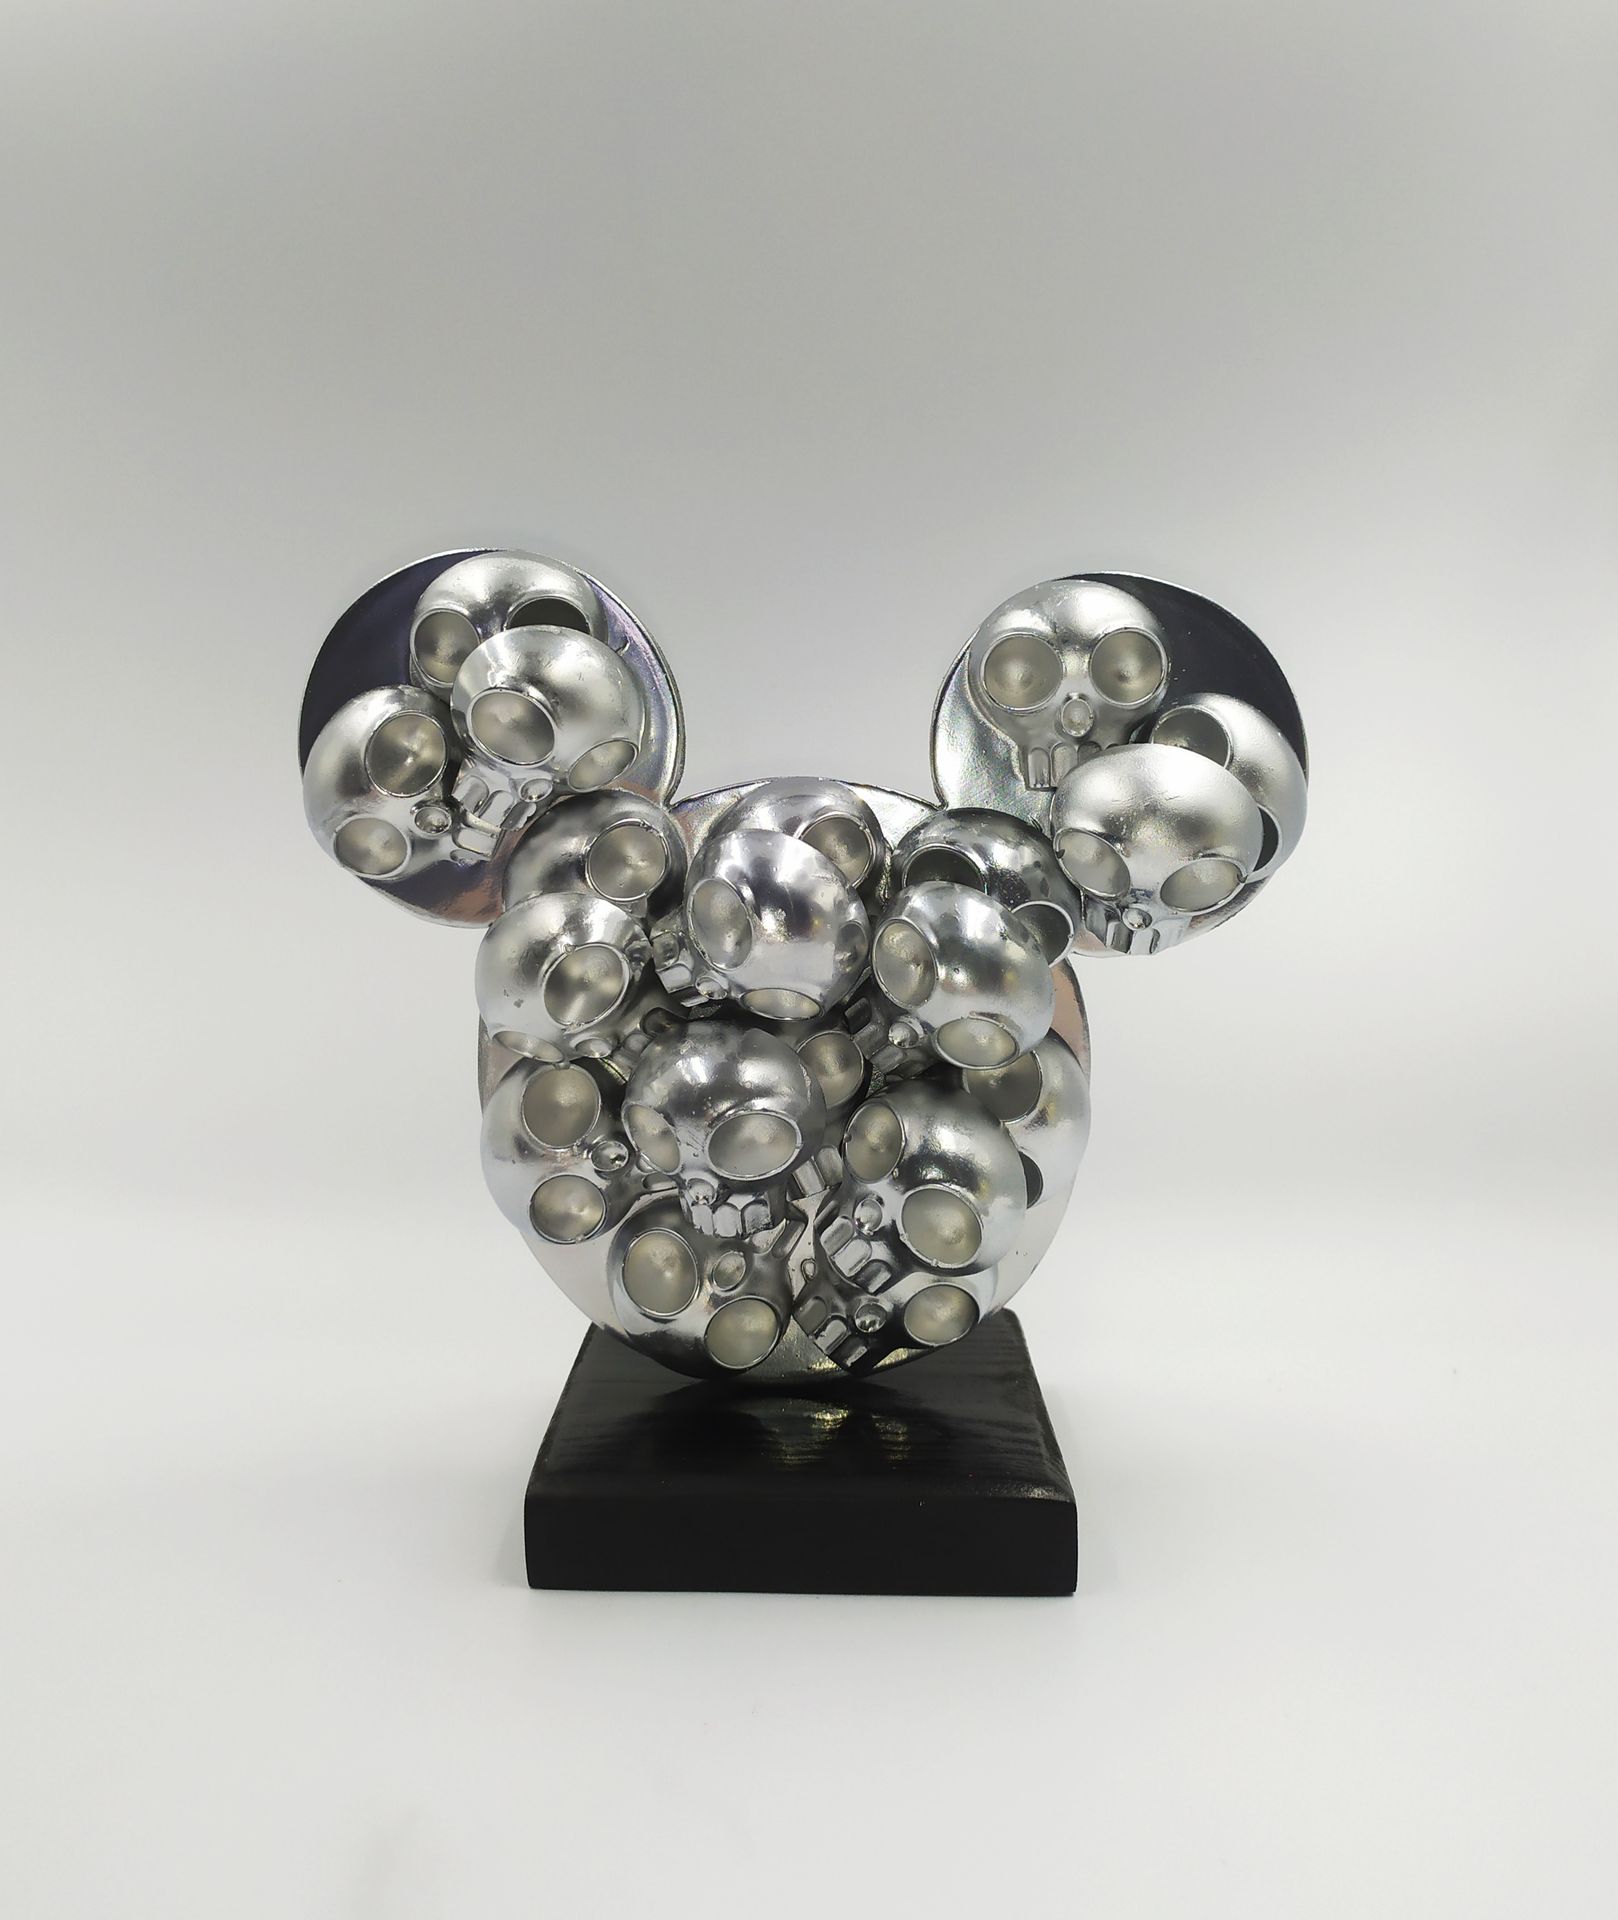 VL VL Mickey Skull, 2021 Mixed technique on resin Unique piece Signed 16 x 5 cm
&hellip;